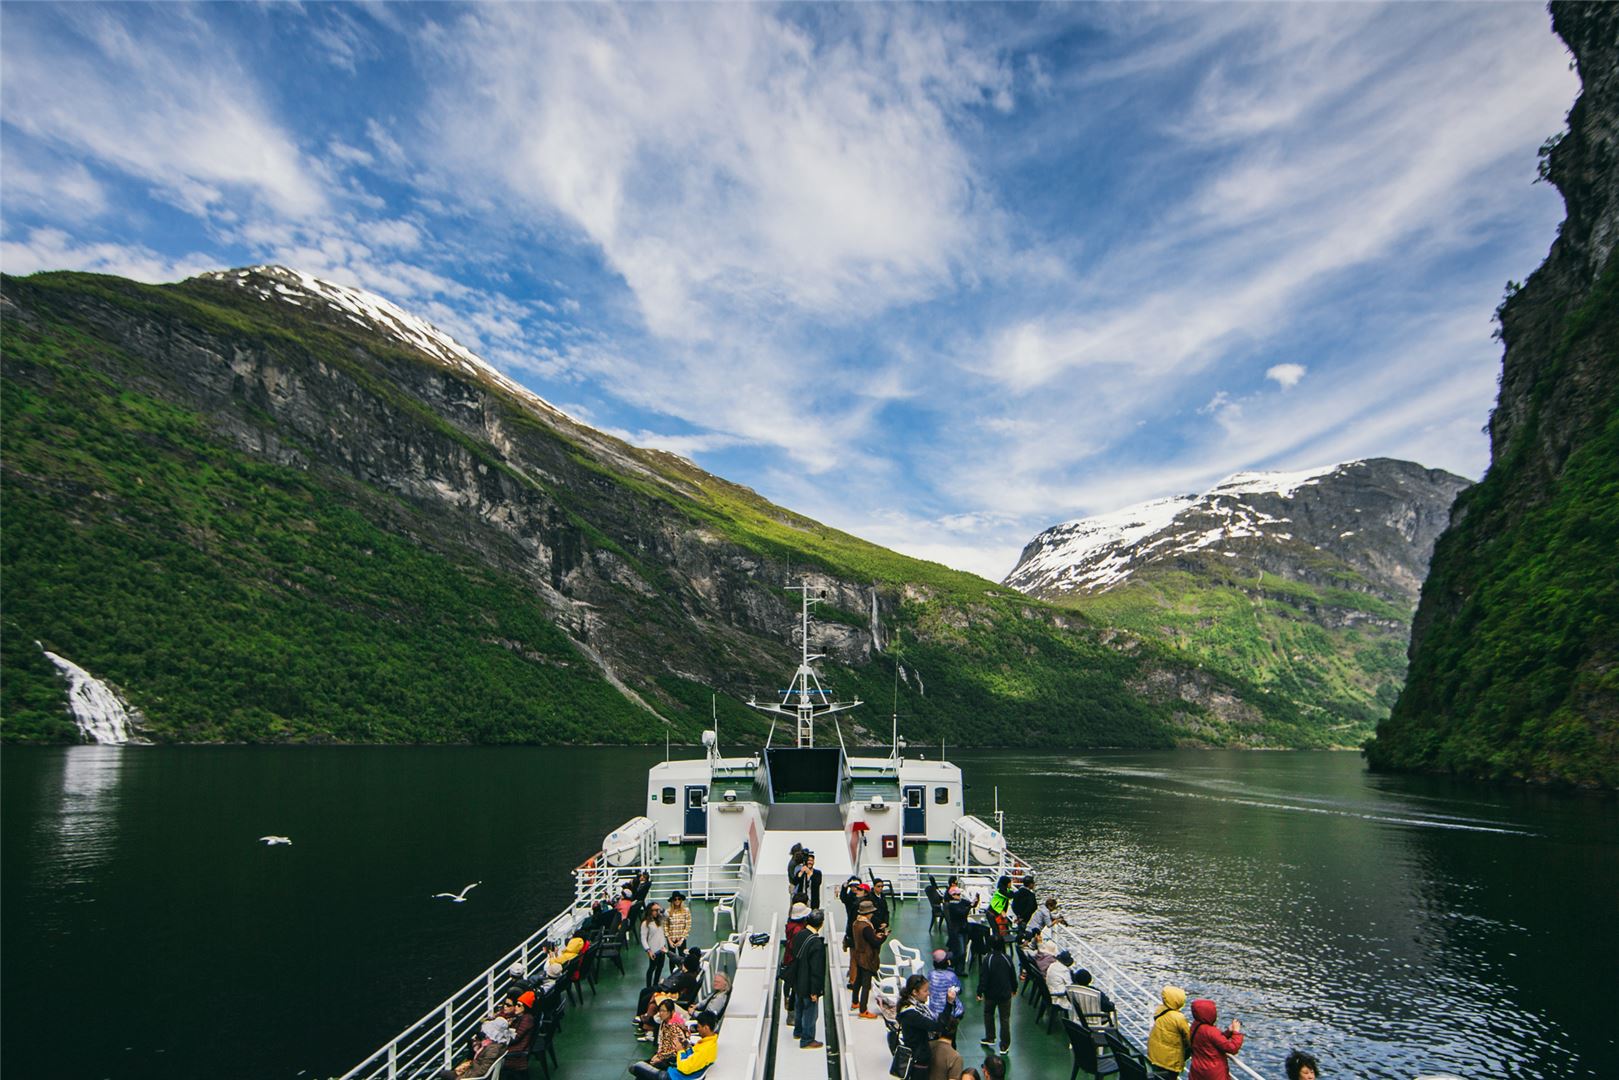 Four Years After Disney's 'Frozen' Debuted, Norway Travel Soars